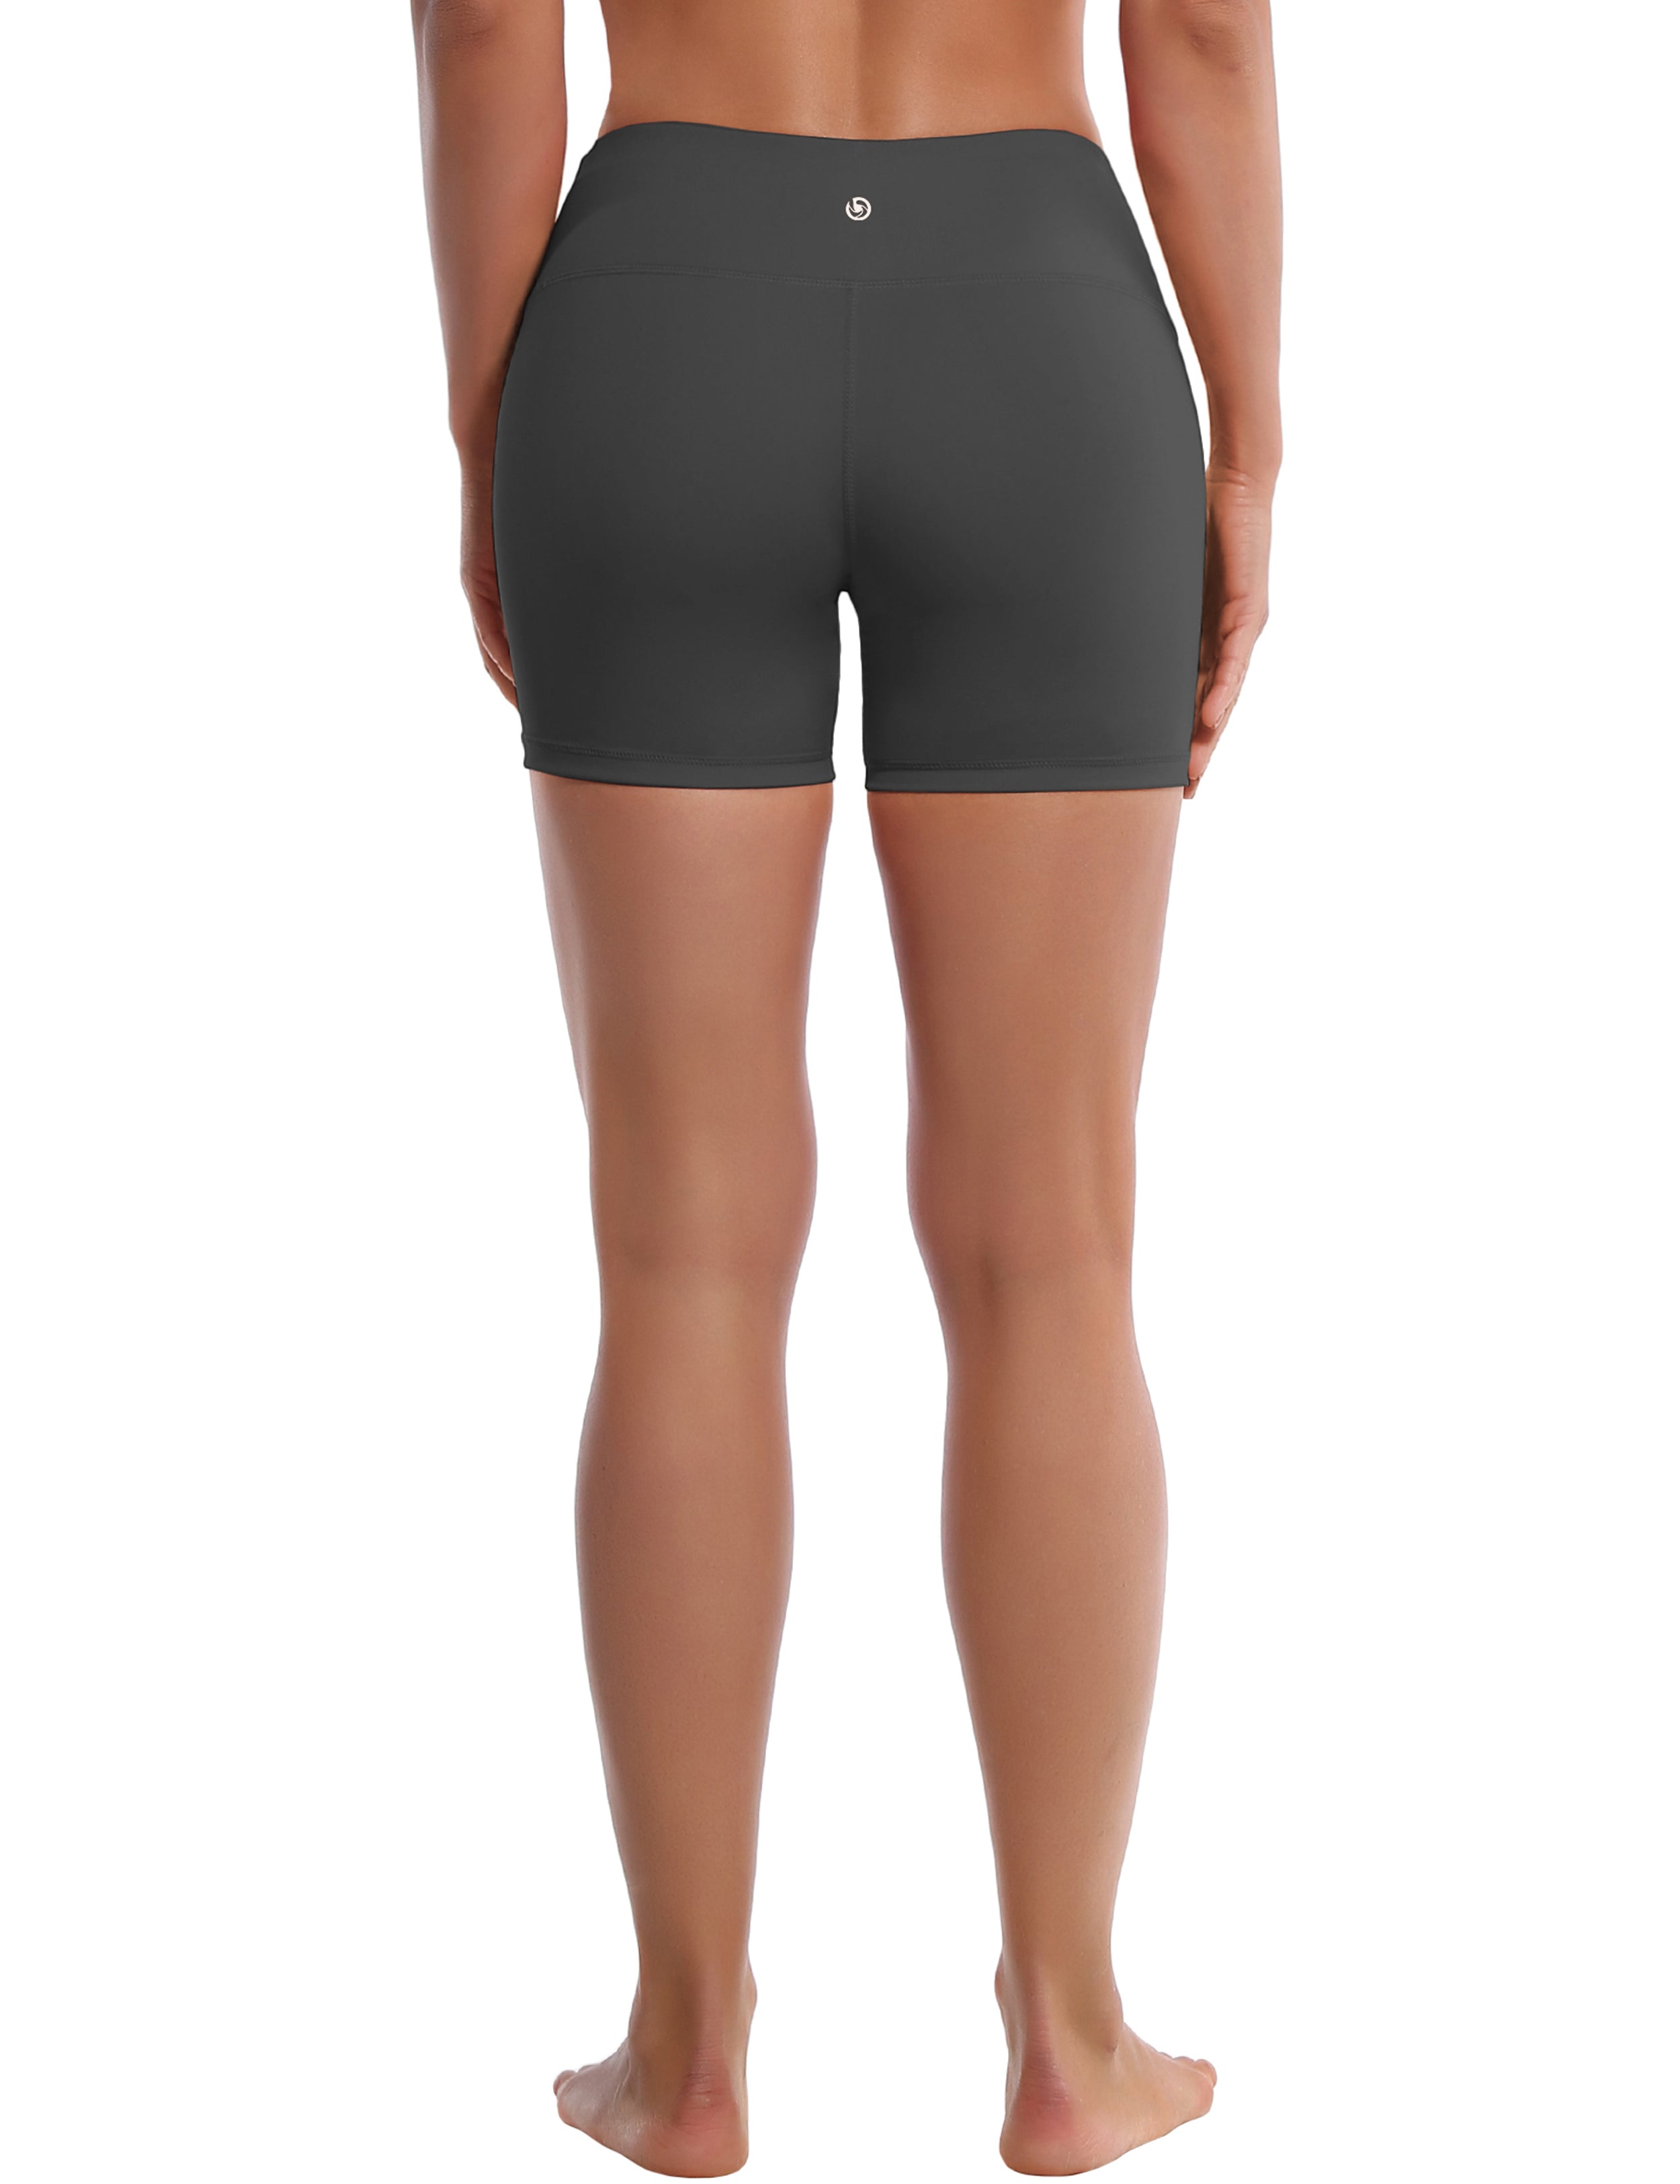 4" Golf Shorts shadowcharcoal Sleek, soft, smooth and totally comfortable: our newest style is here. Softest-ever fabric High elasticity High density 4-way stretch Fabric doesn't attract lint easily No see-through Moisture-wicking Machine wash 75% Nylon, 25% Spandex